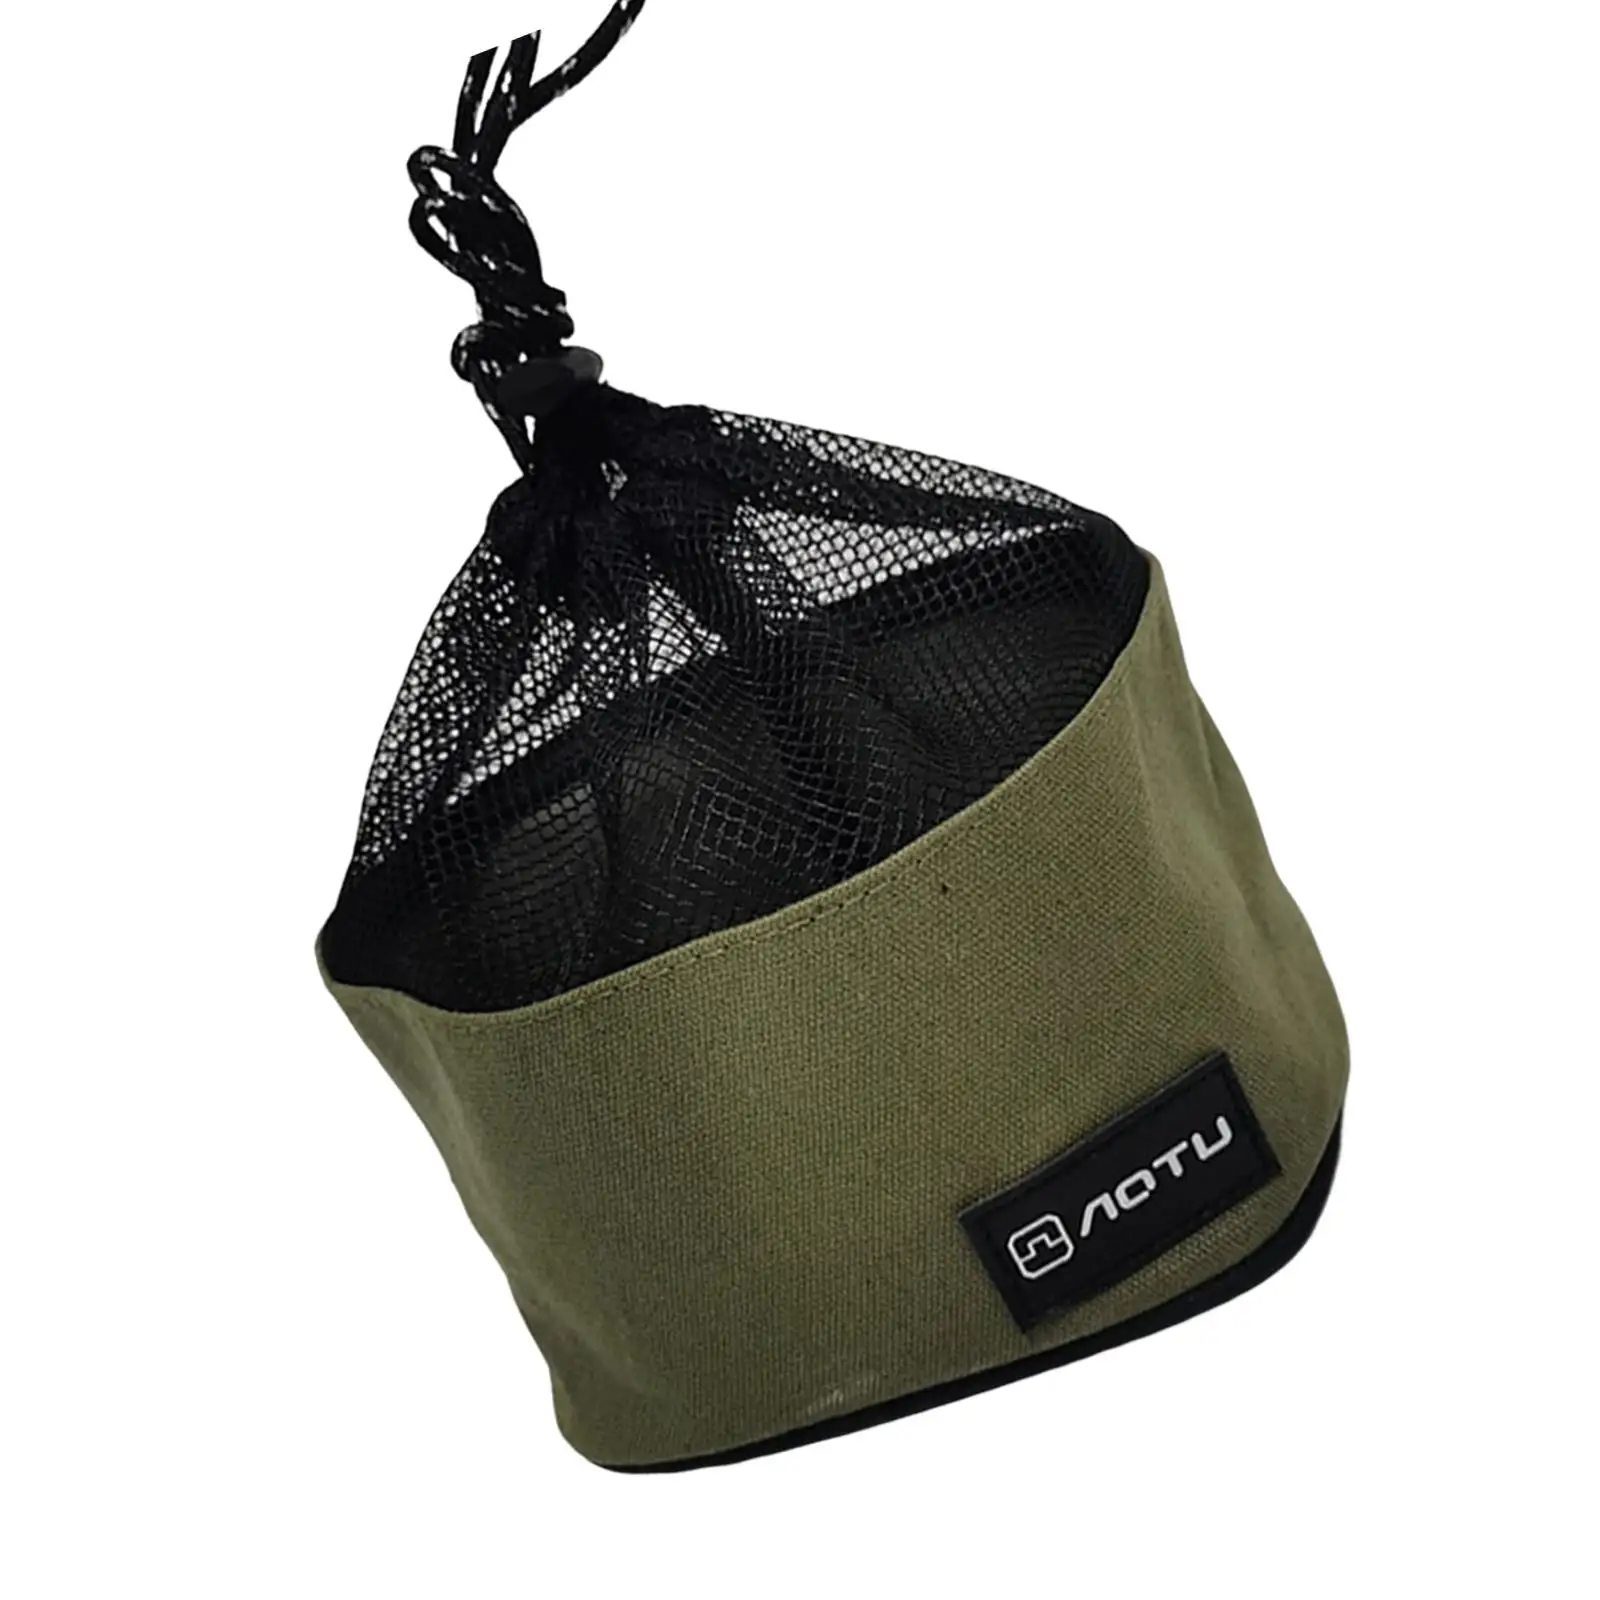 Portable Camping Cookware Storage Bag Case Drawstring Bag Pouch Tote Tableware Storage for Outdoor Cooking Barbecue